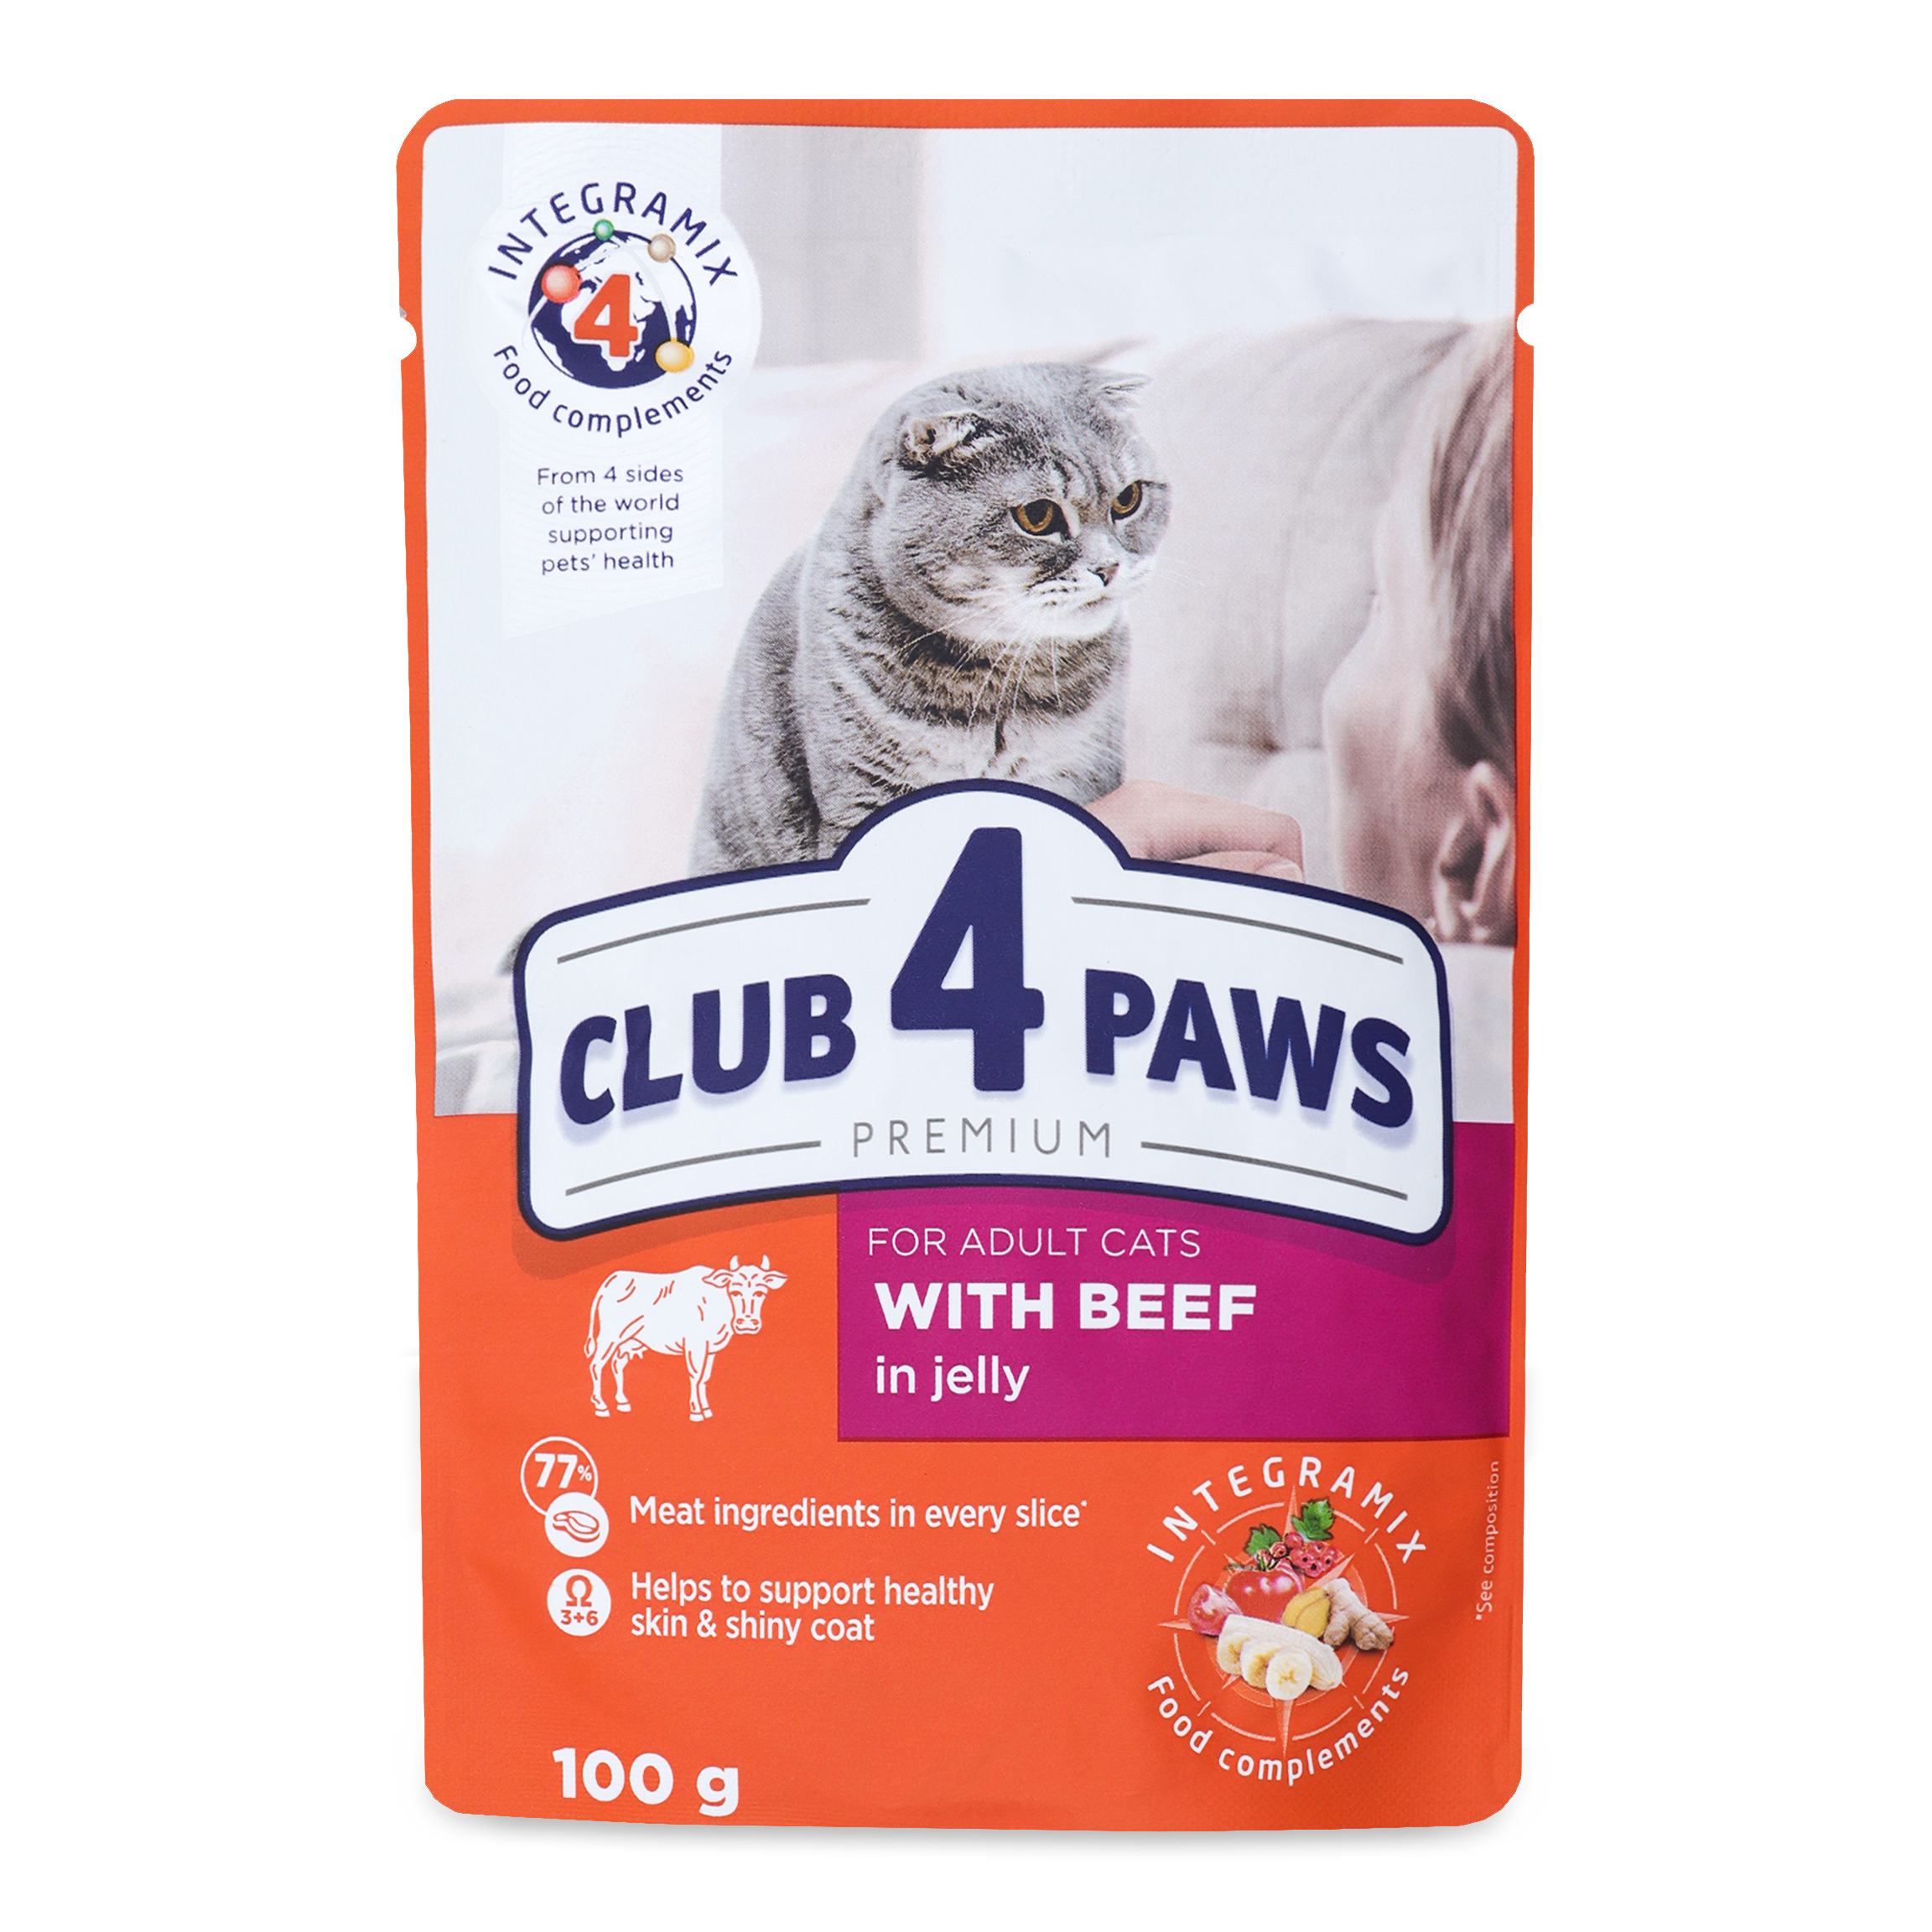 Club 4 Paws Premium with Beef in Jelly Canned Food for Adult Cat's 100g